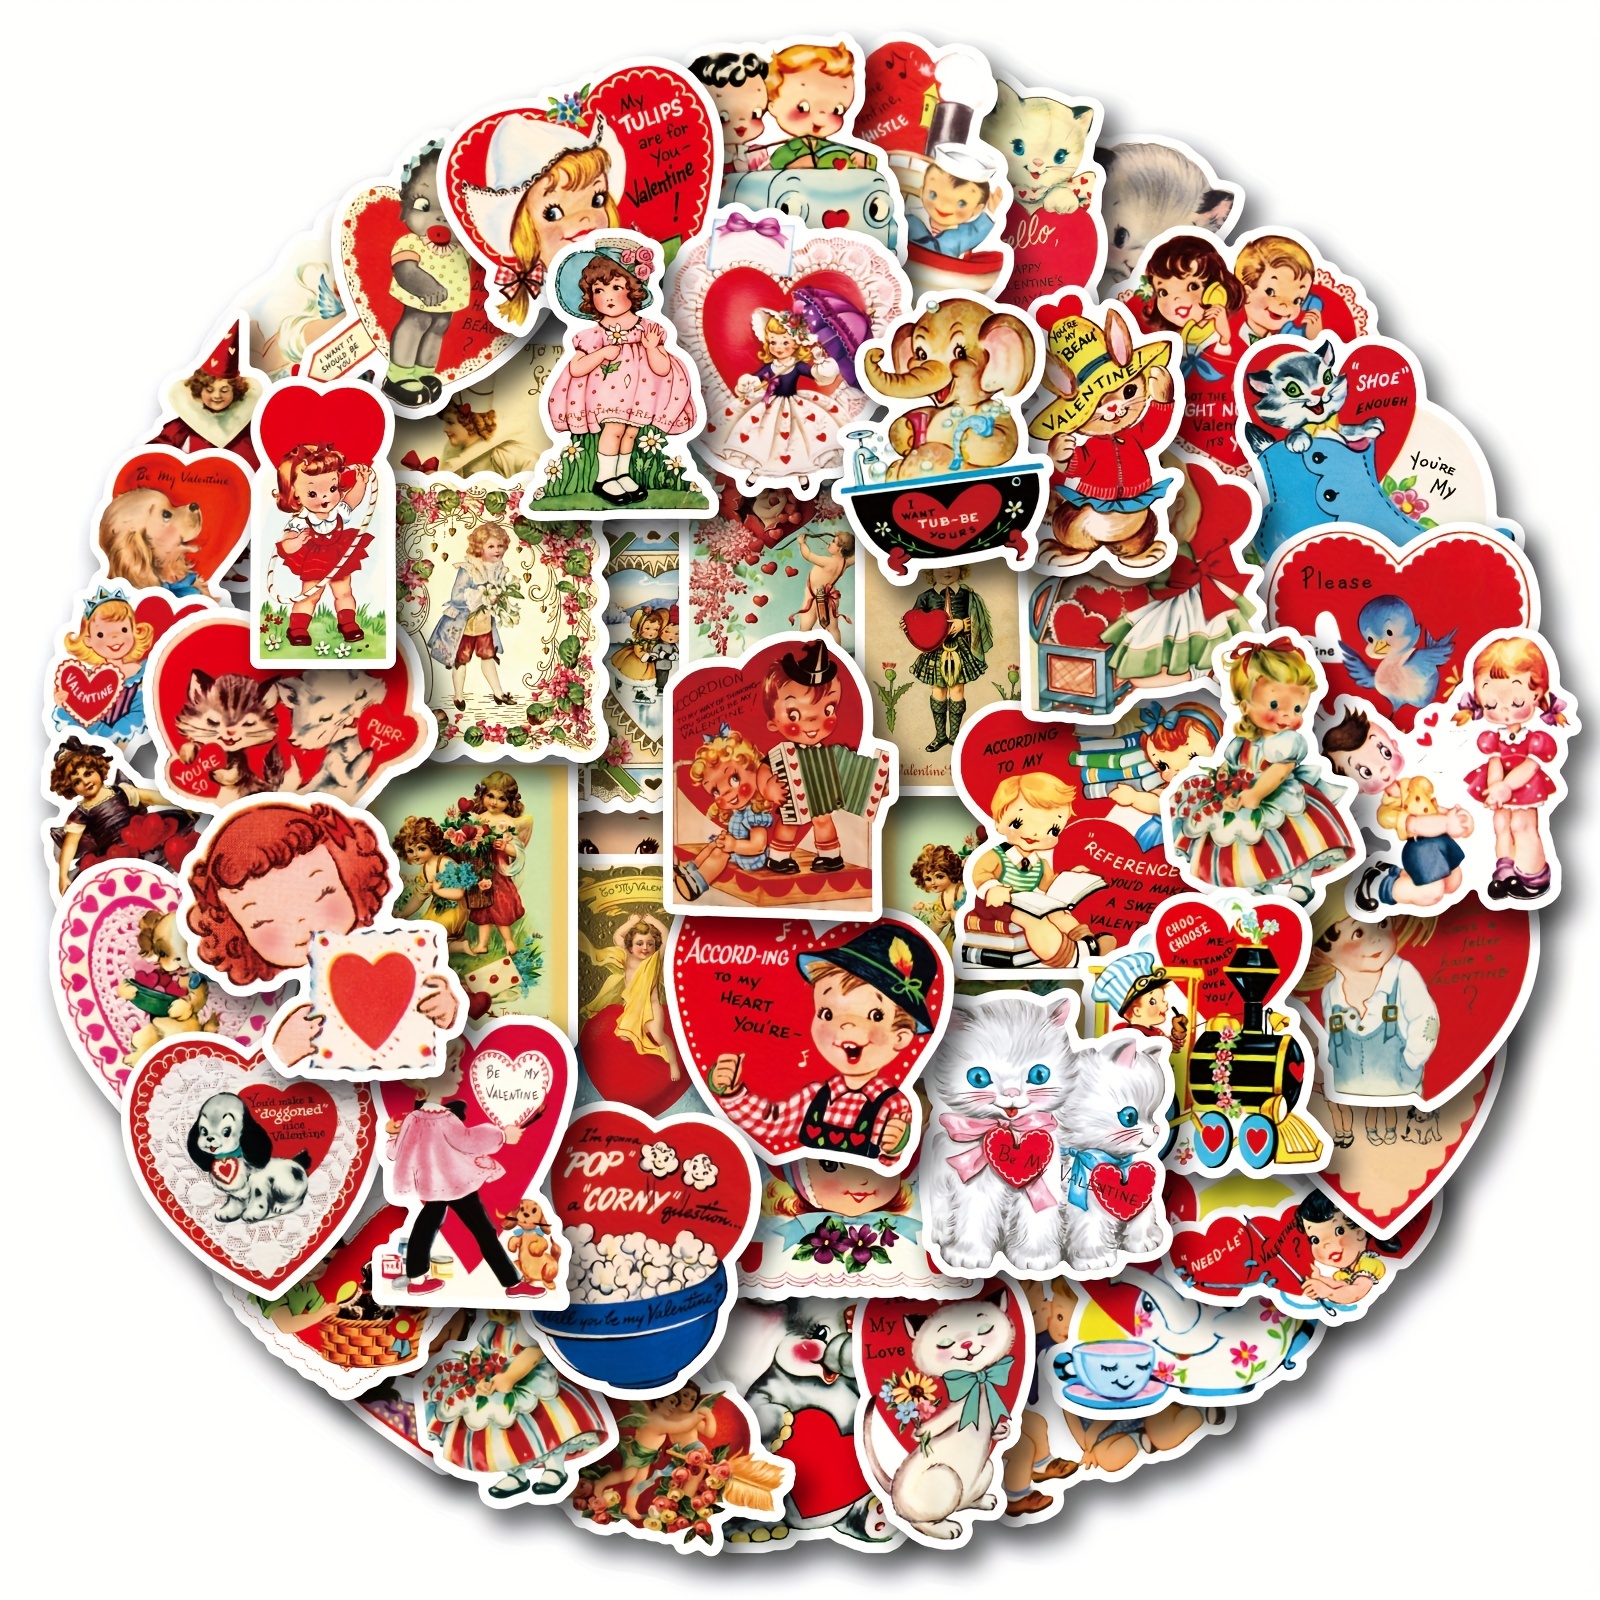 Heart Lockets Vintage Valentines Day Greeting Cards